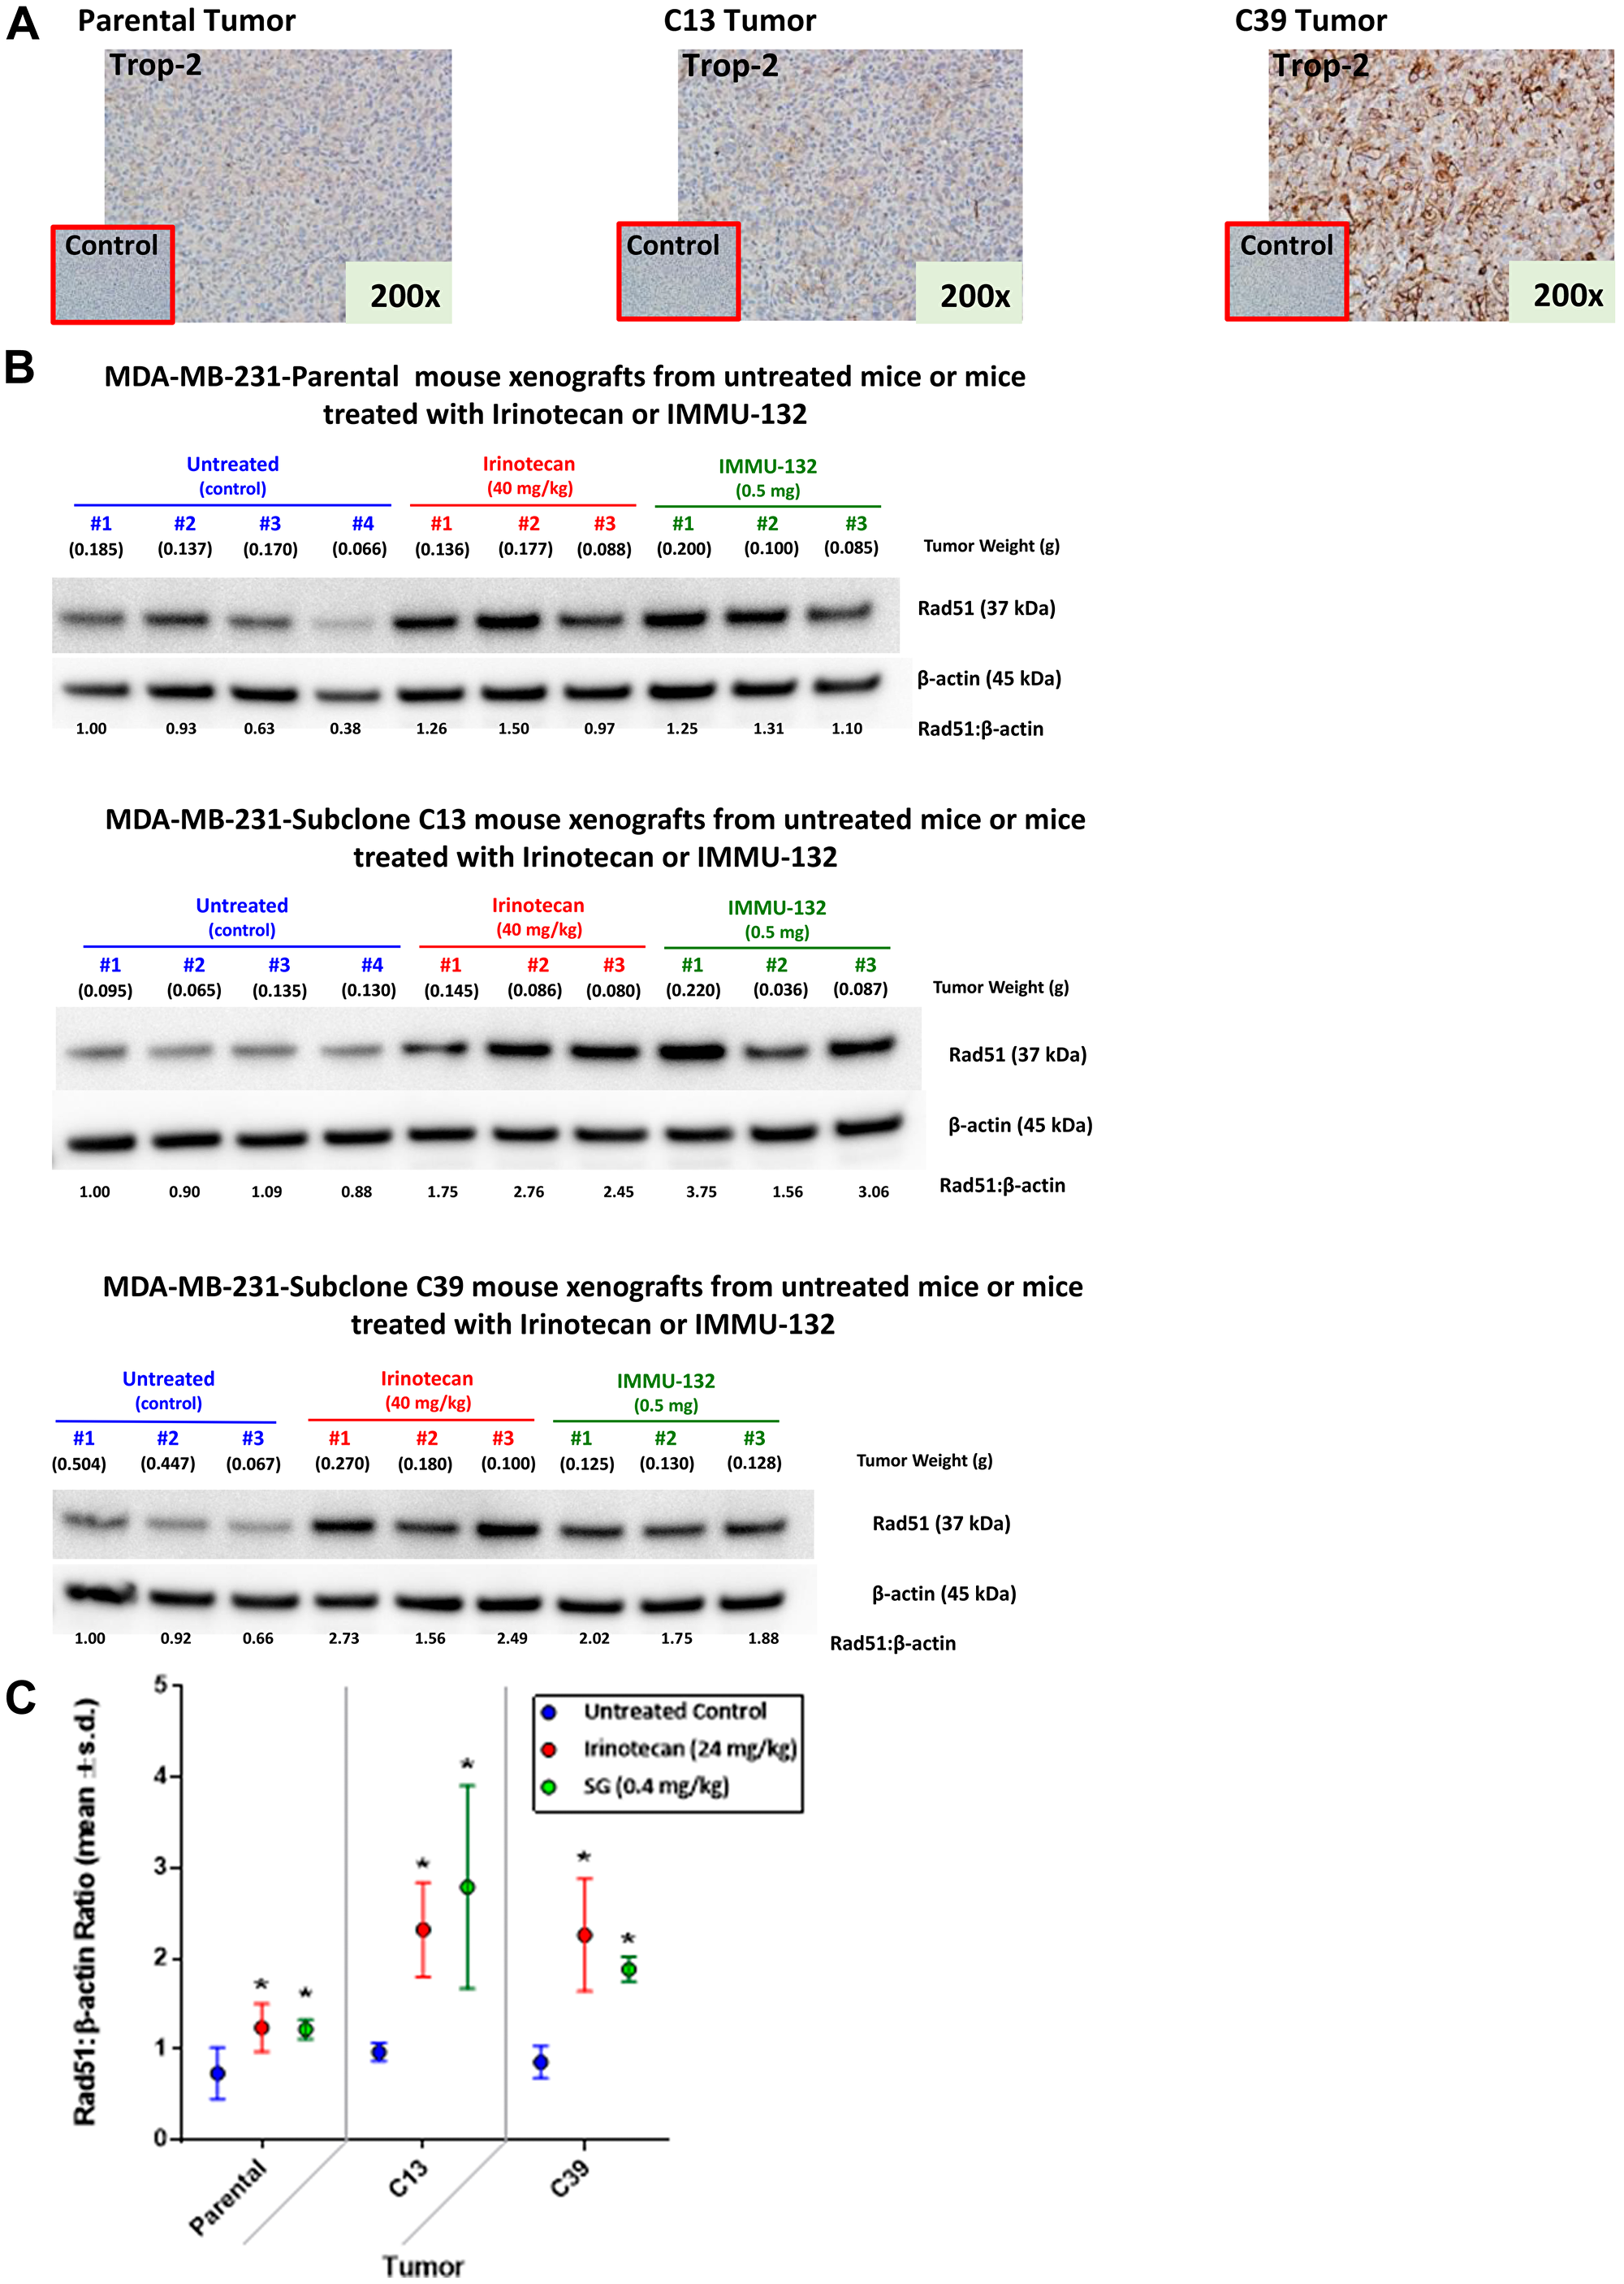 Expression of Trop-2 and changes in Rad51 expression mediated by irinotecan and SG in tumor xenografts of parental MDA-MB-231 and clones 13 and 39.